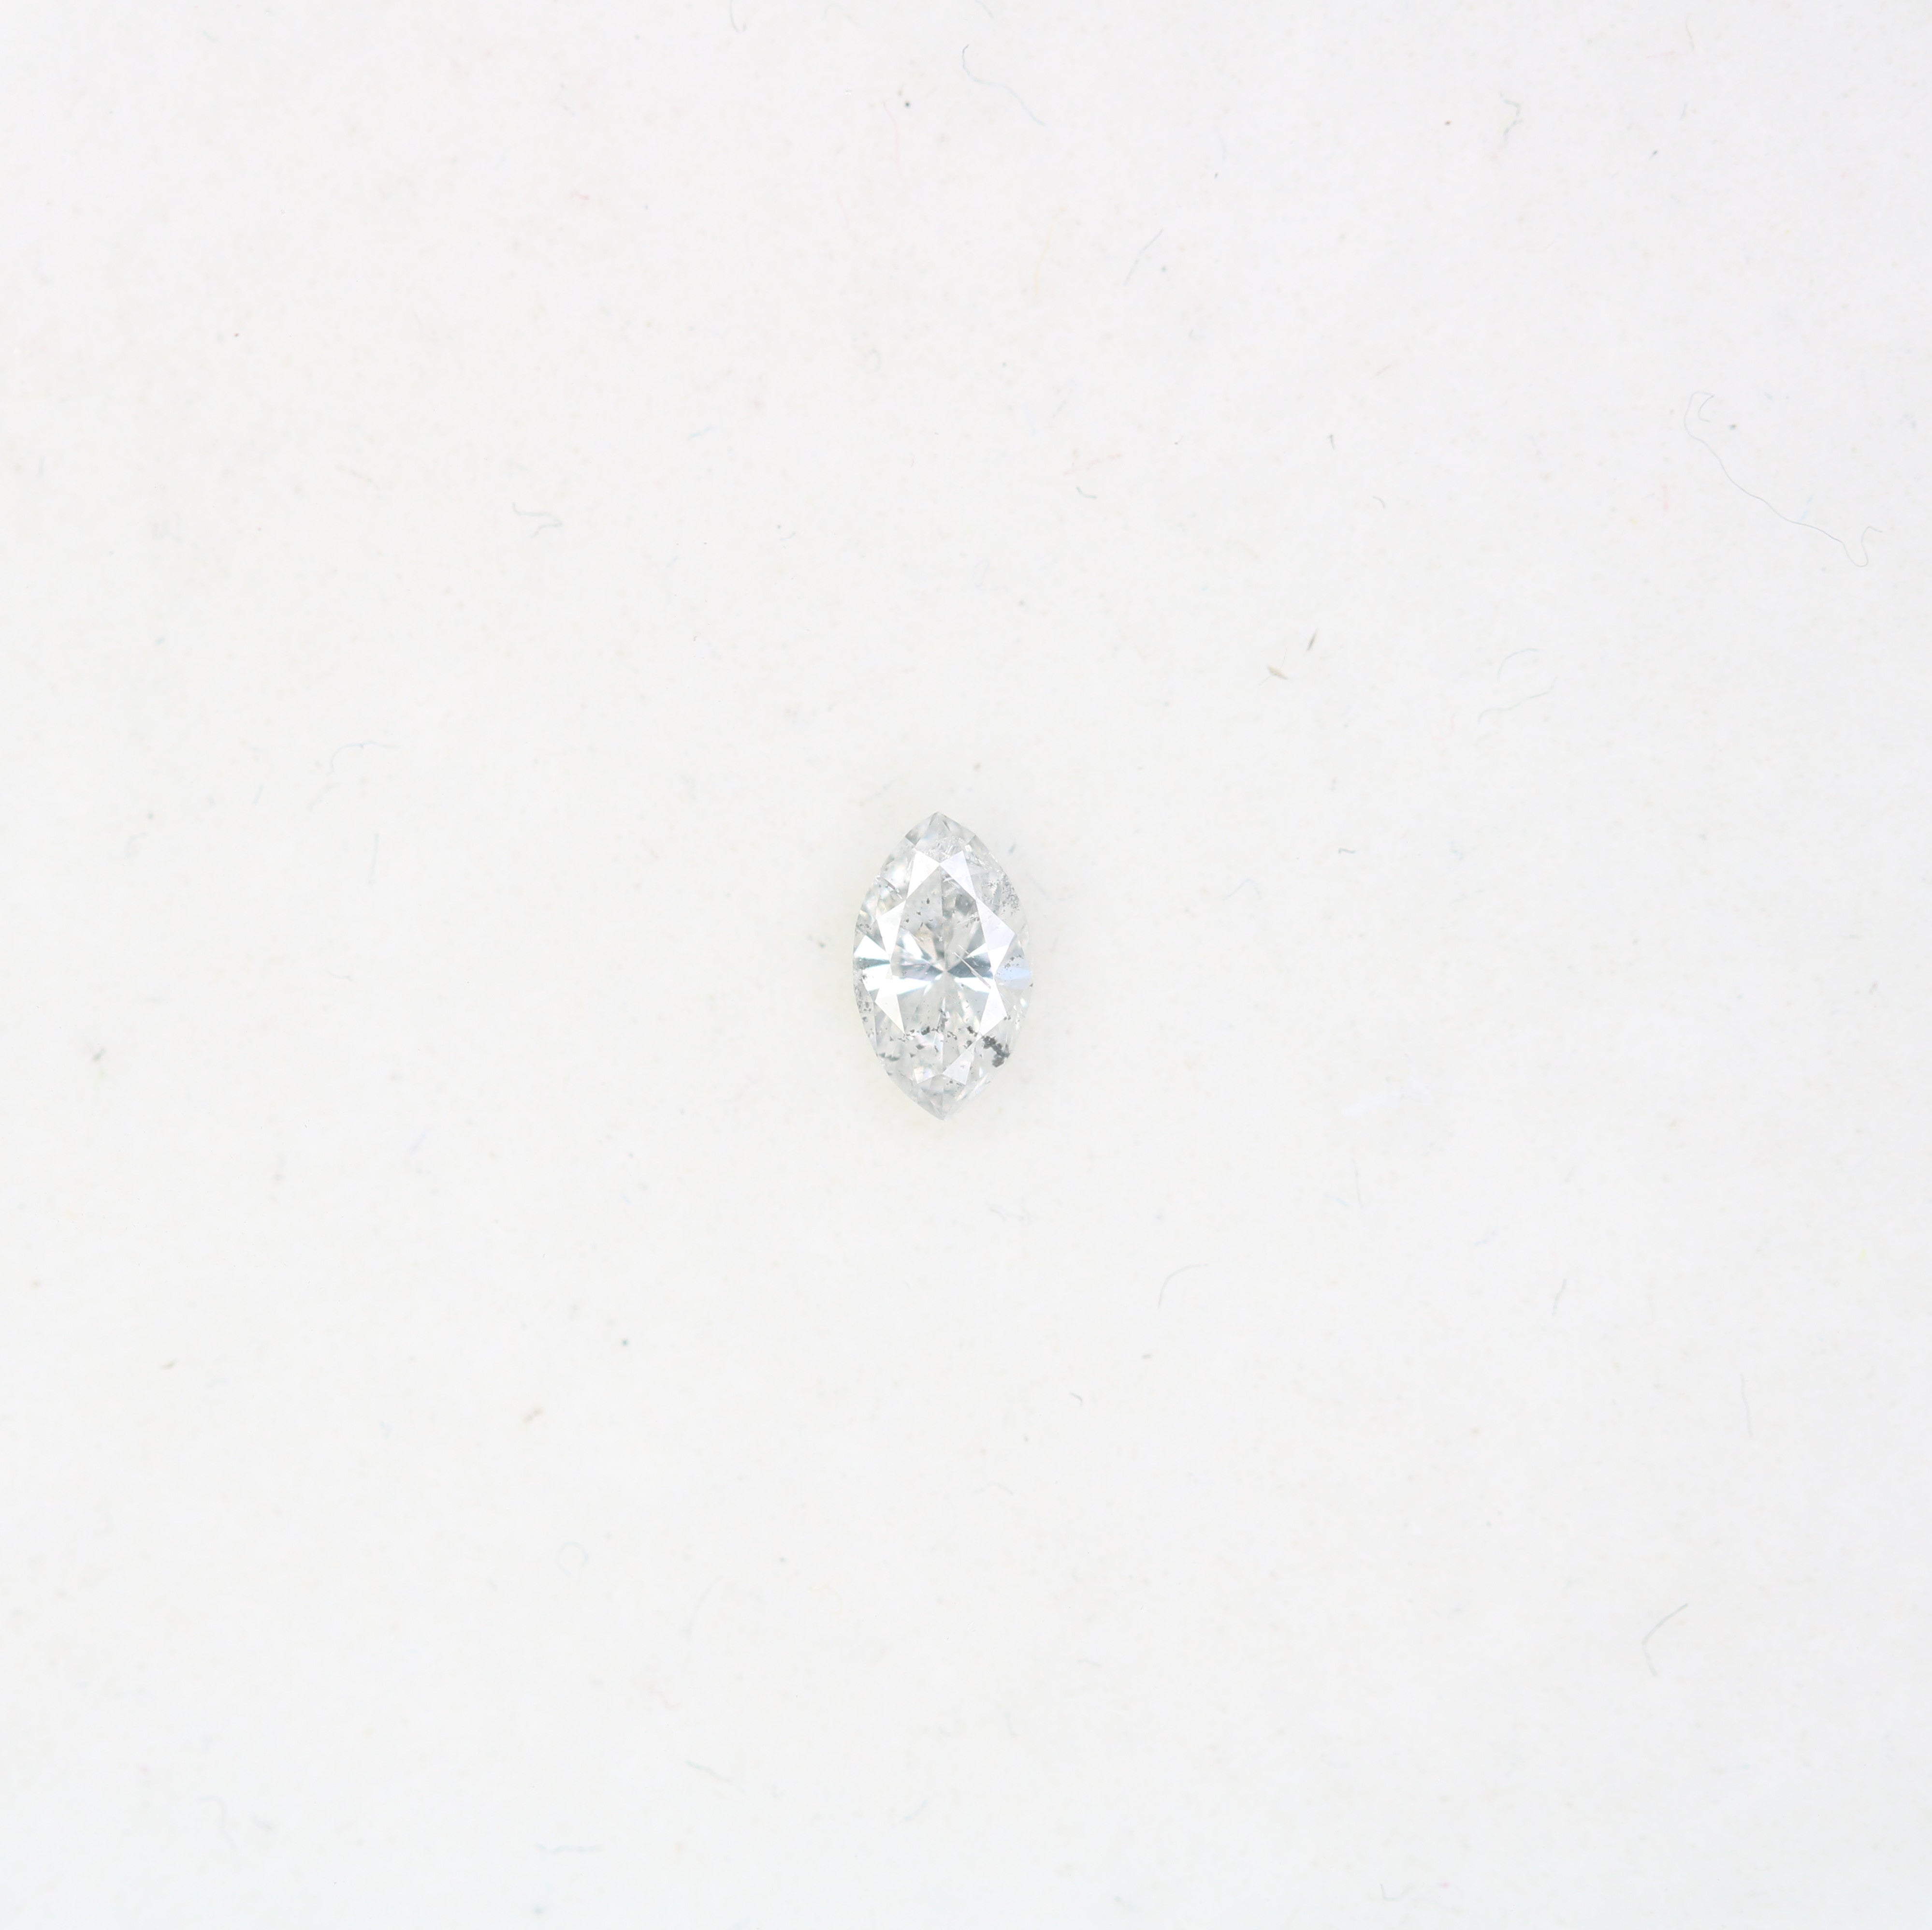 0.17 CT Loose White Marquise Shape Diamond For Engagement Ring